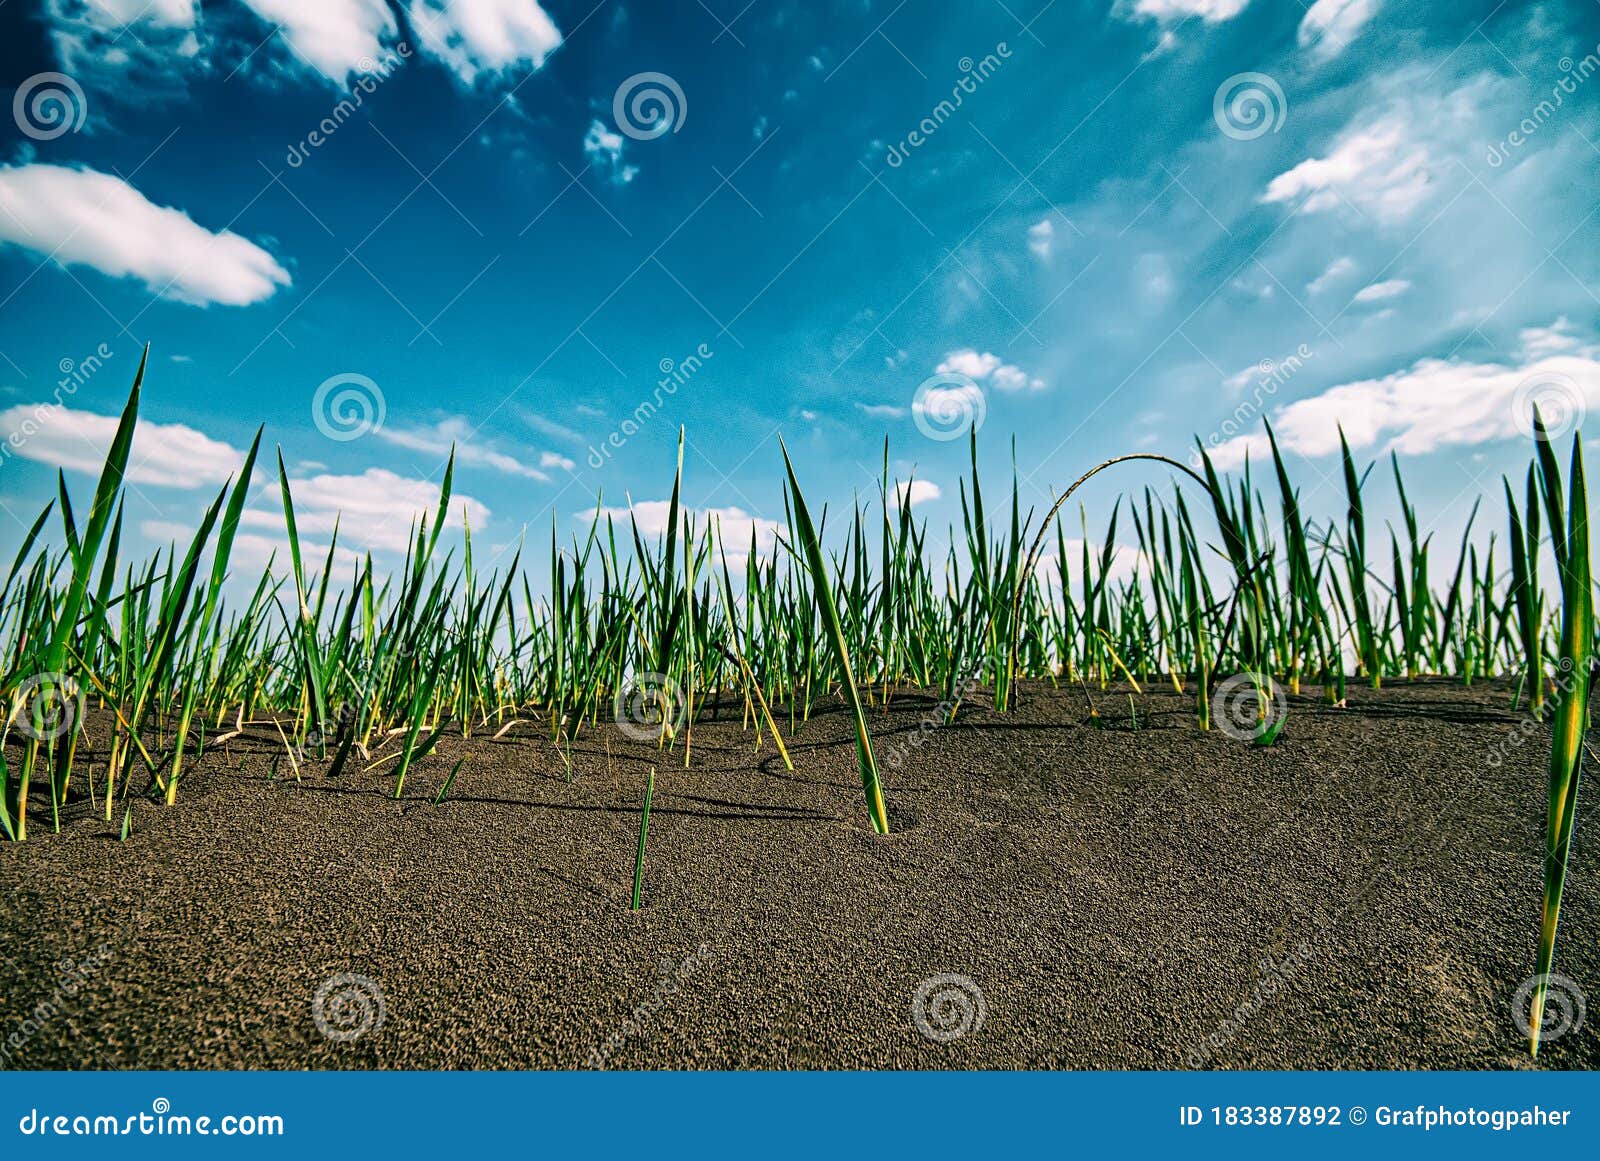 young reeds germinate in weathered soils